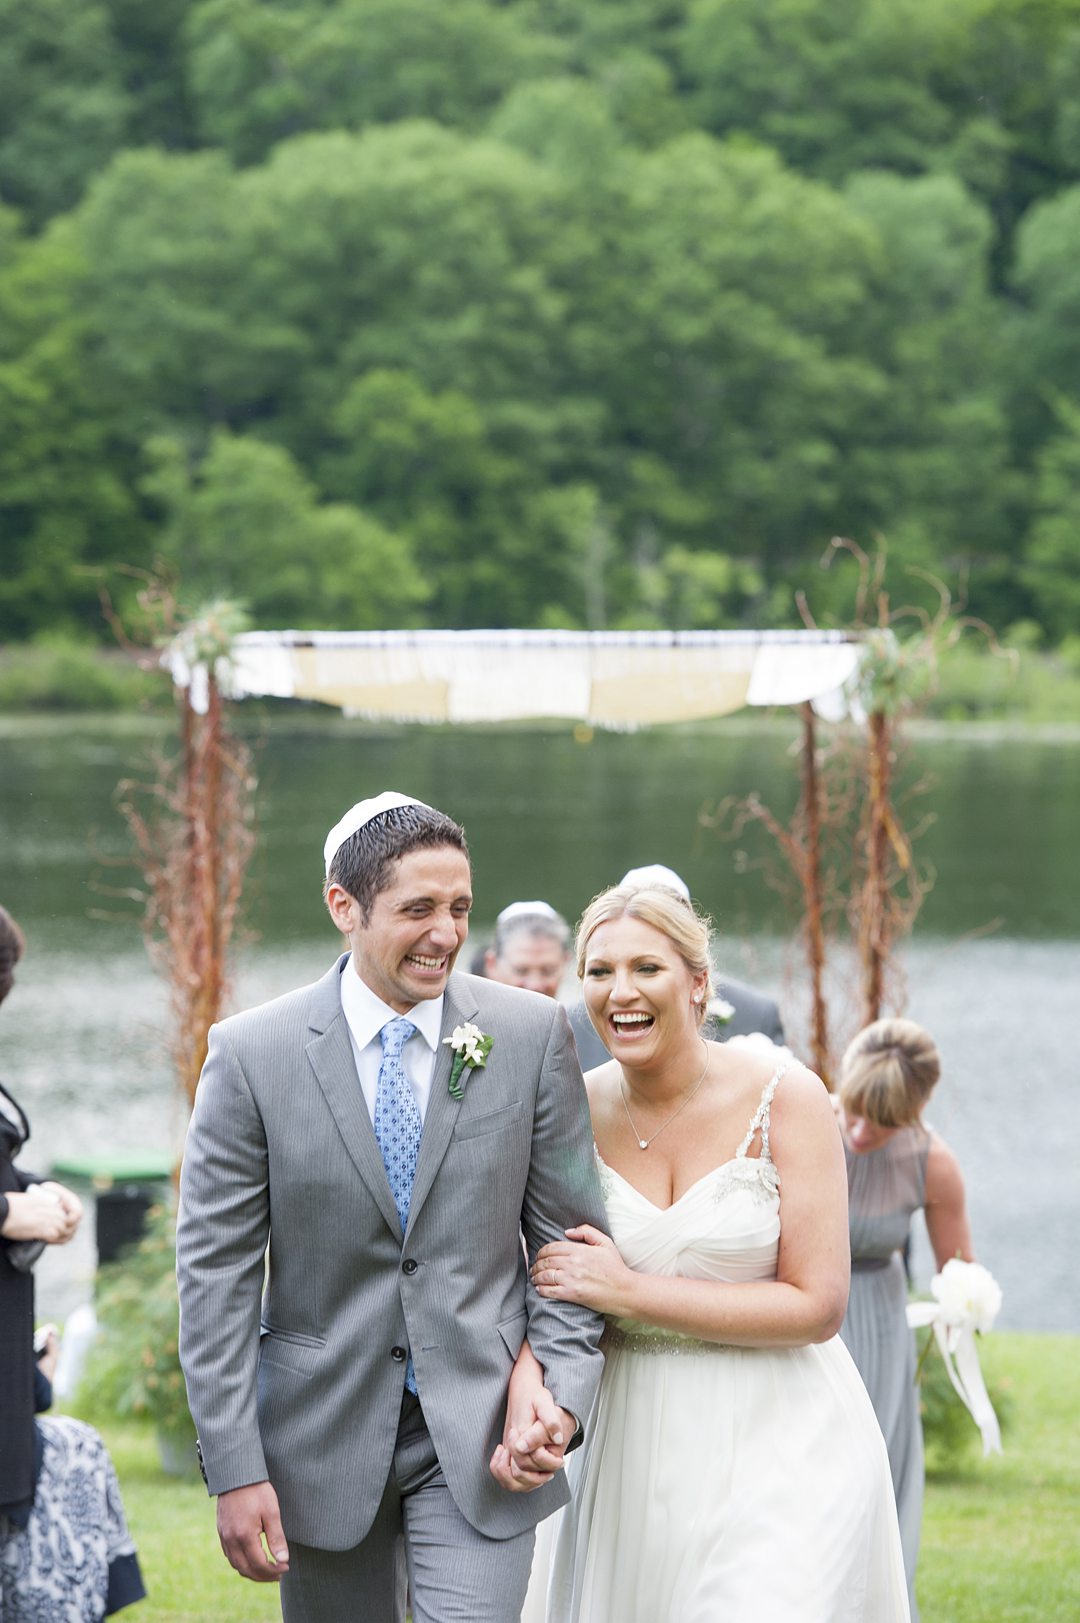 Ceremony photos by Mikkel Paige Photography overlooking the lake at Club Getaway. This sleepaway camp is the perfect venue for a fun wedding weekend.